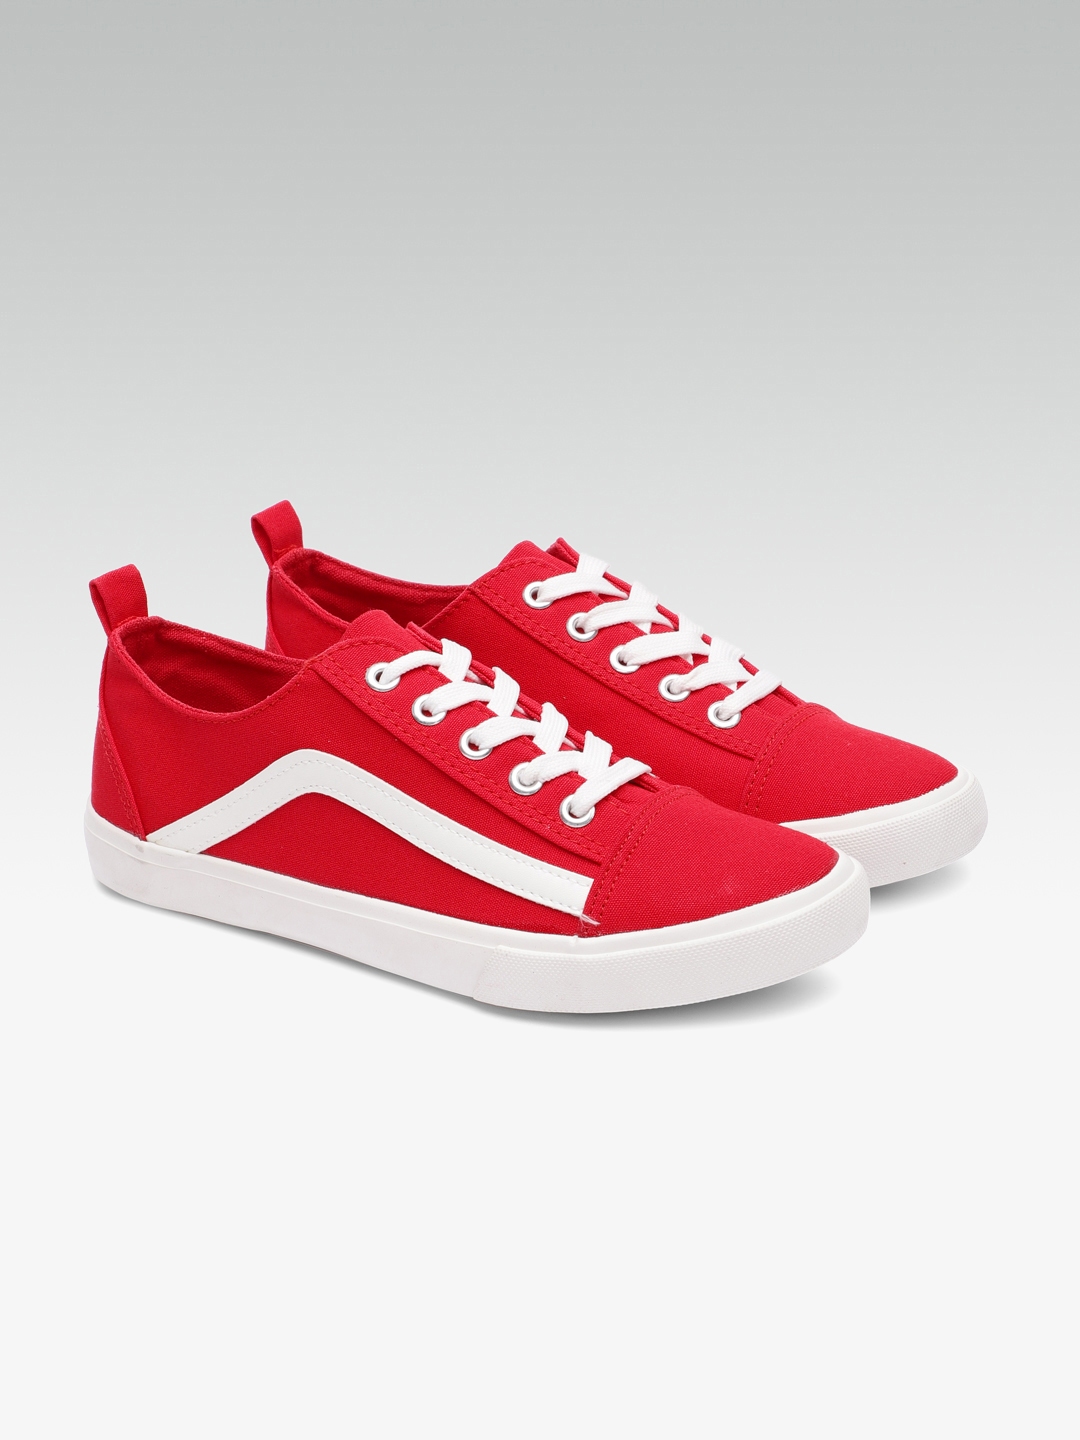 womens casual red shoes